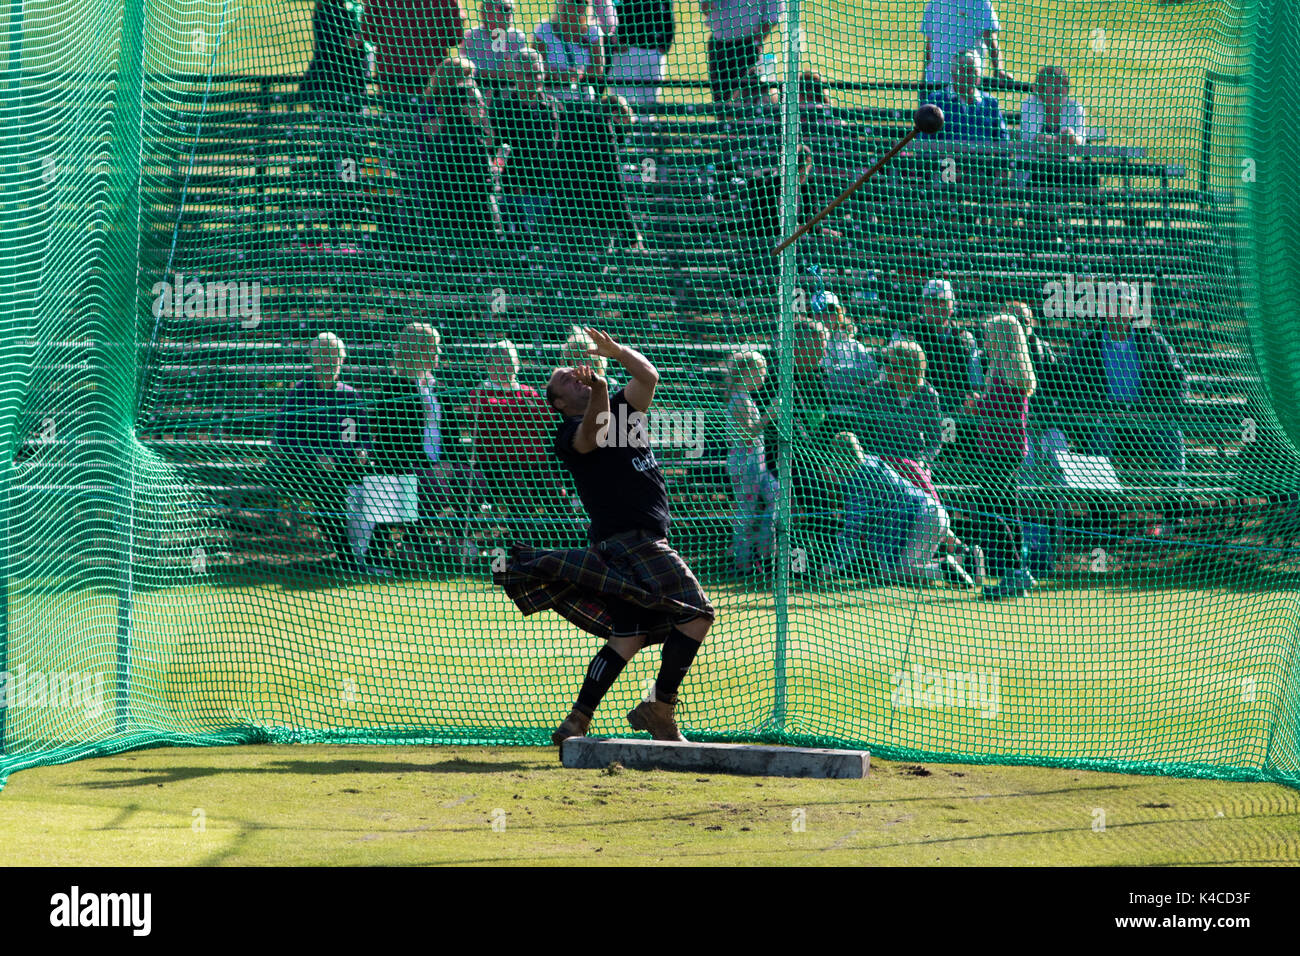 Braemar, Scotland, UK. 02 Sep, 2017: Athletes competing at the 22lb Hammer Throw event during the 2017 Braemar Highland Games. Stock Photo